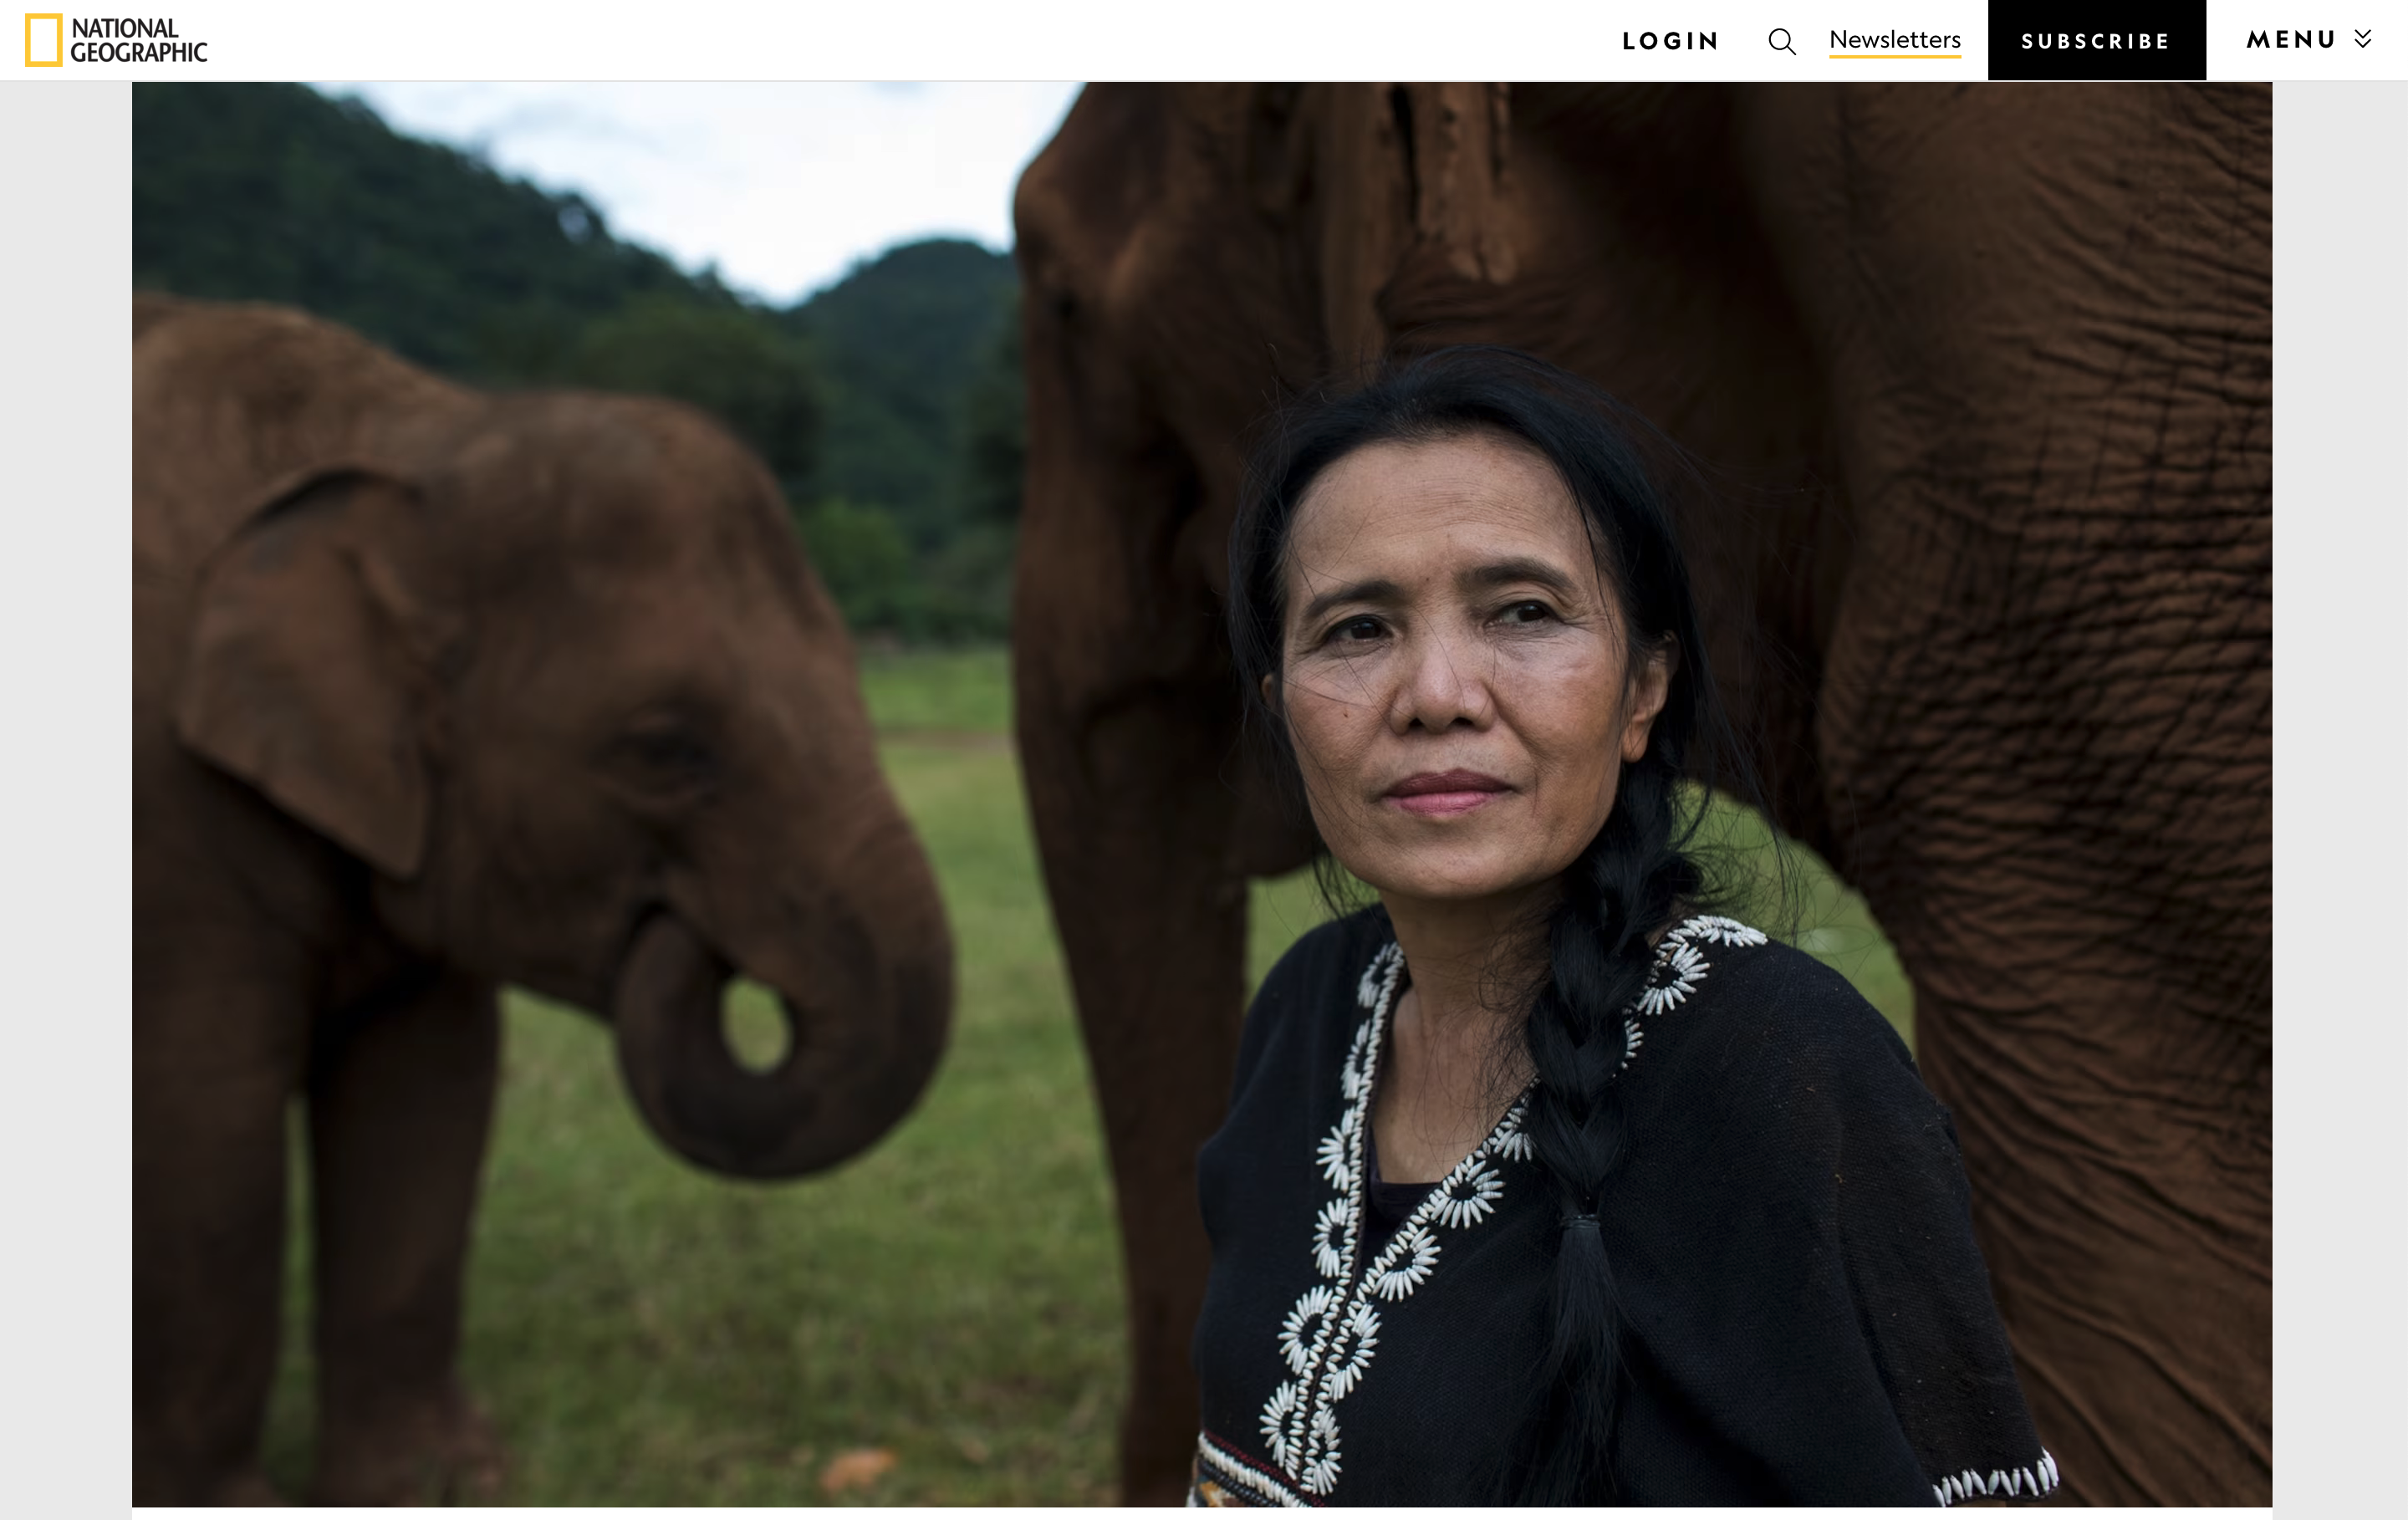 National Geographic - A year without tourism: crisis for Thailand’s captive elephants